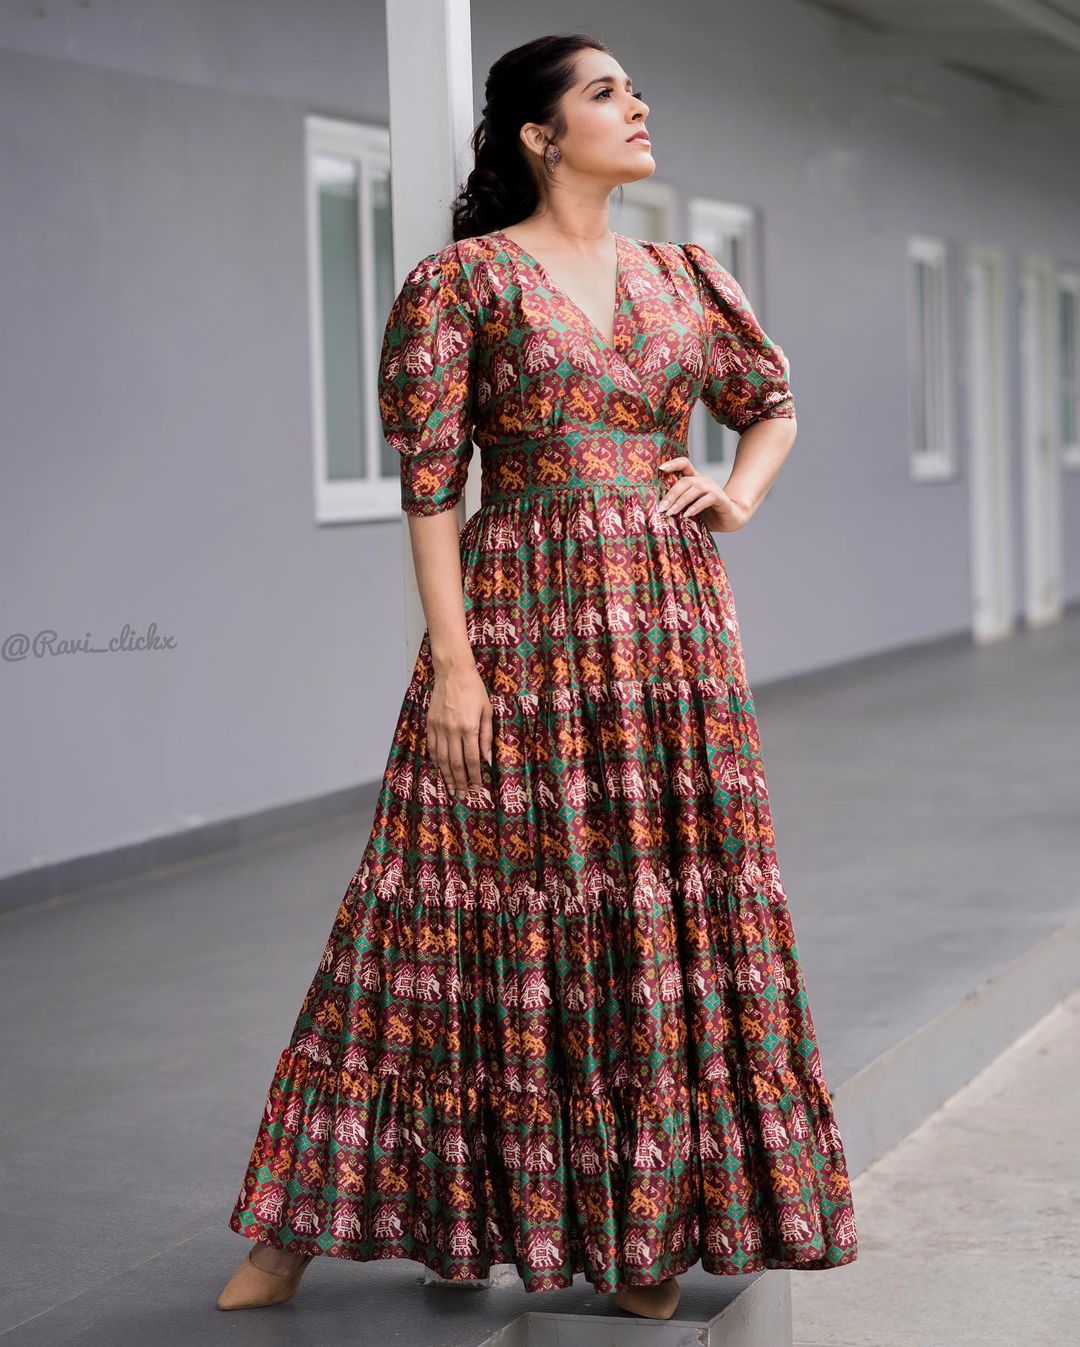 Anchor rashmi gautam ups her fashion style in this poses-Rashmigautam, Anchorrashmi, Rashmi Gautam Photos,Spicy Hot Pics,Images,High Resolution WallPapers Download